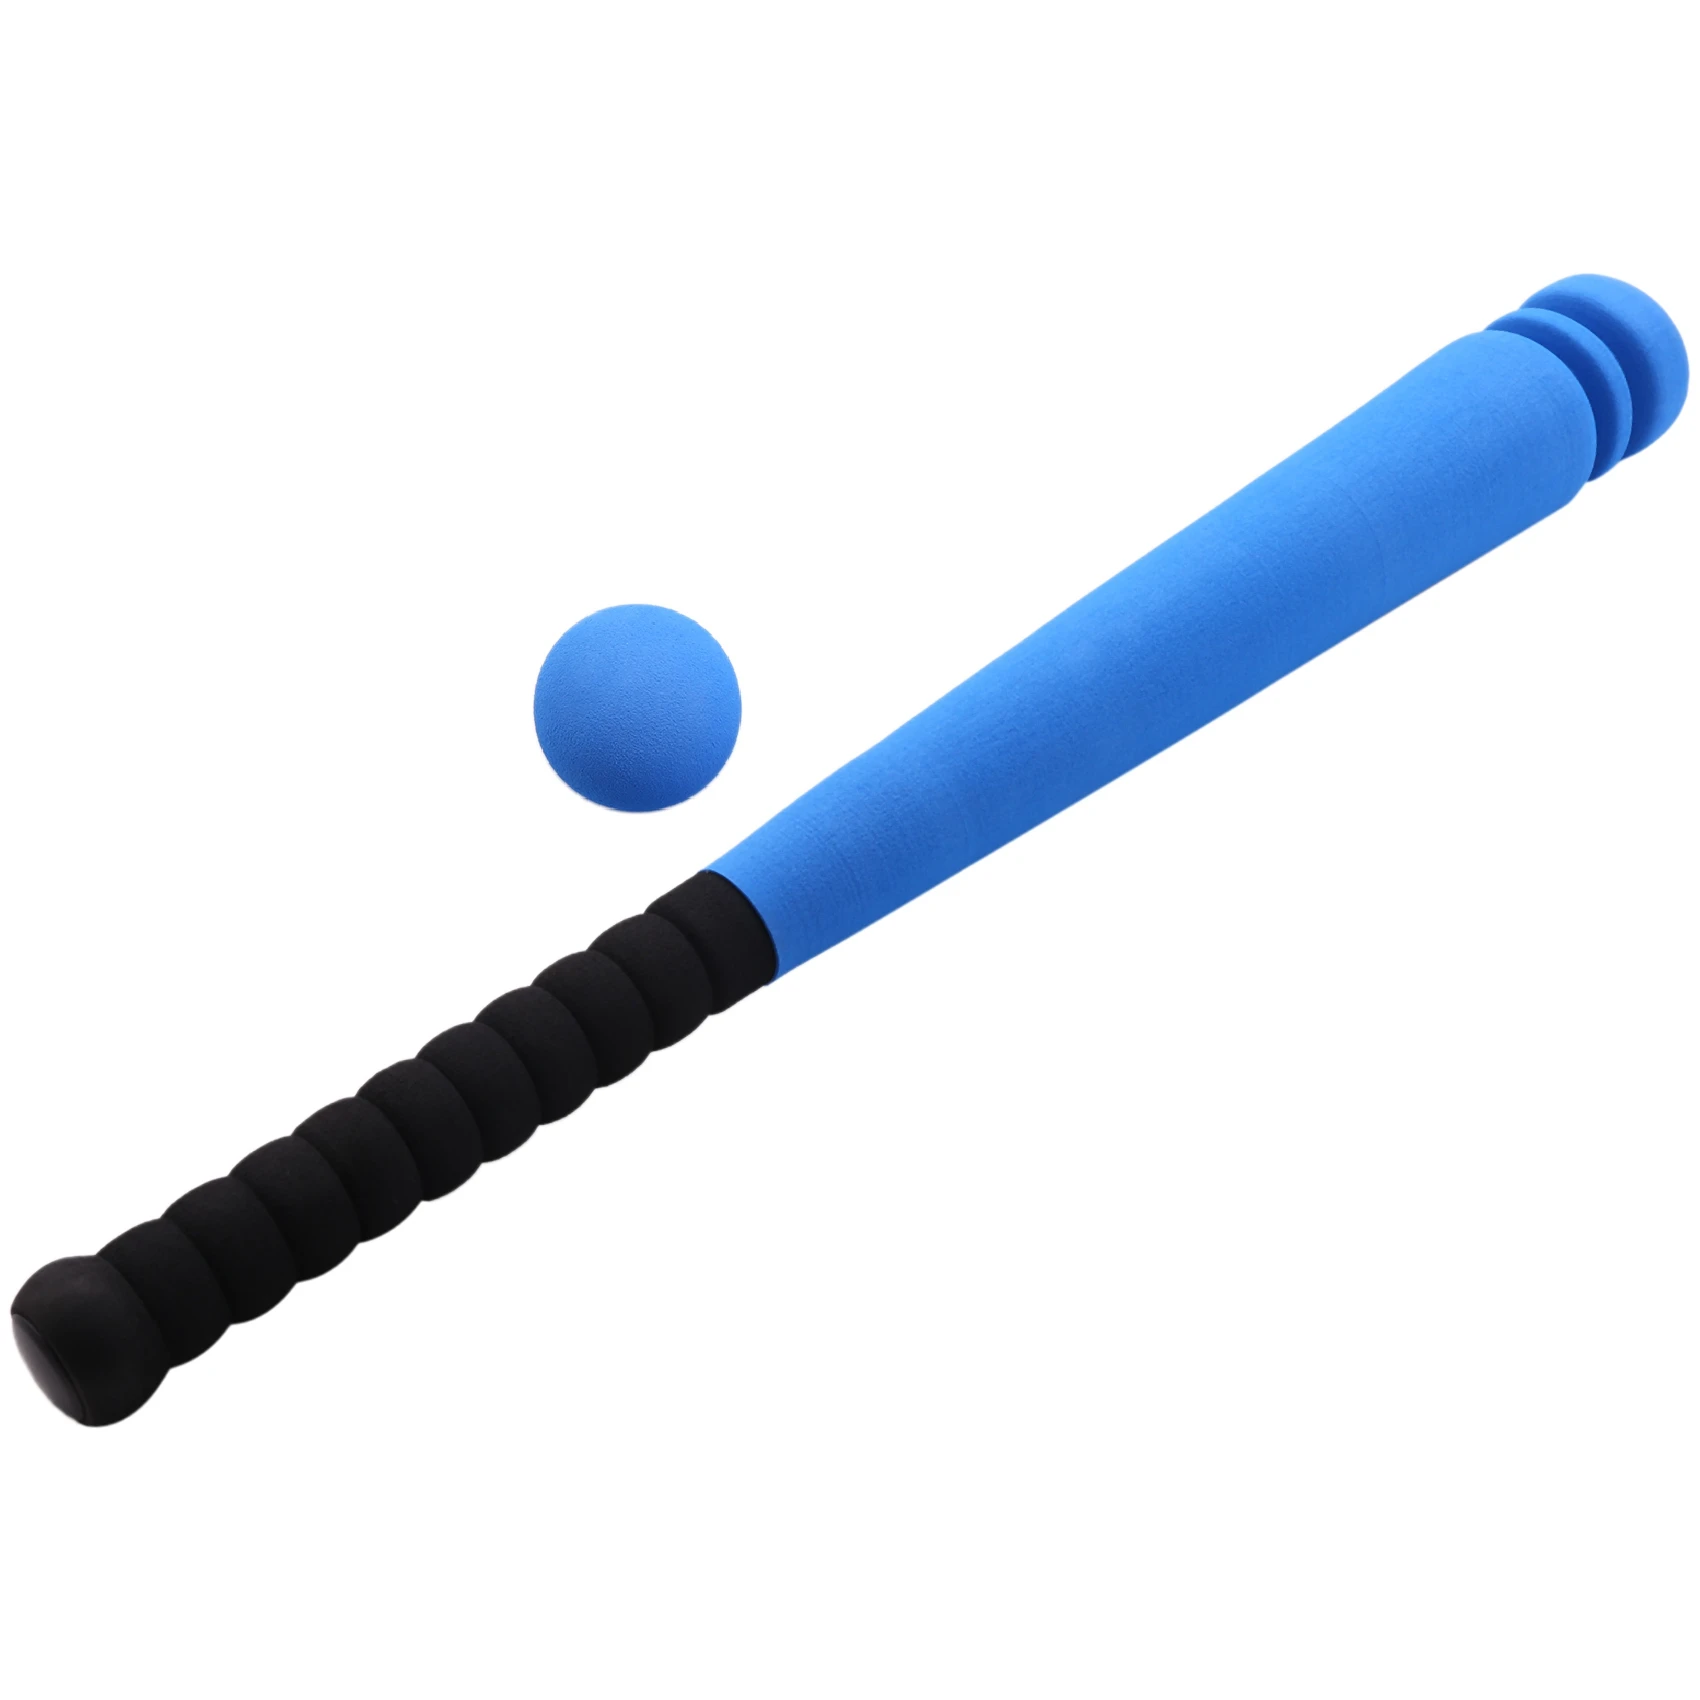 

Foam Baseball Bat with Baseball Toy Set for Children Age 3 to 5 Years Old,Blue